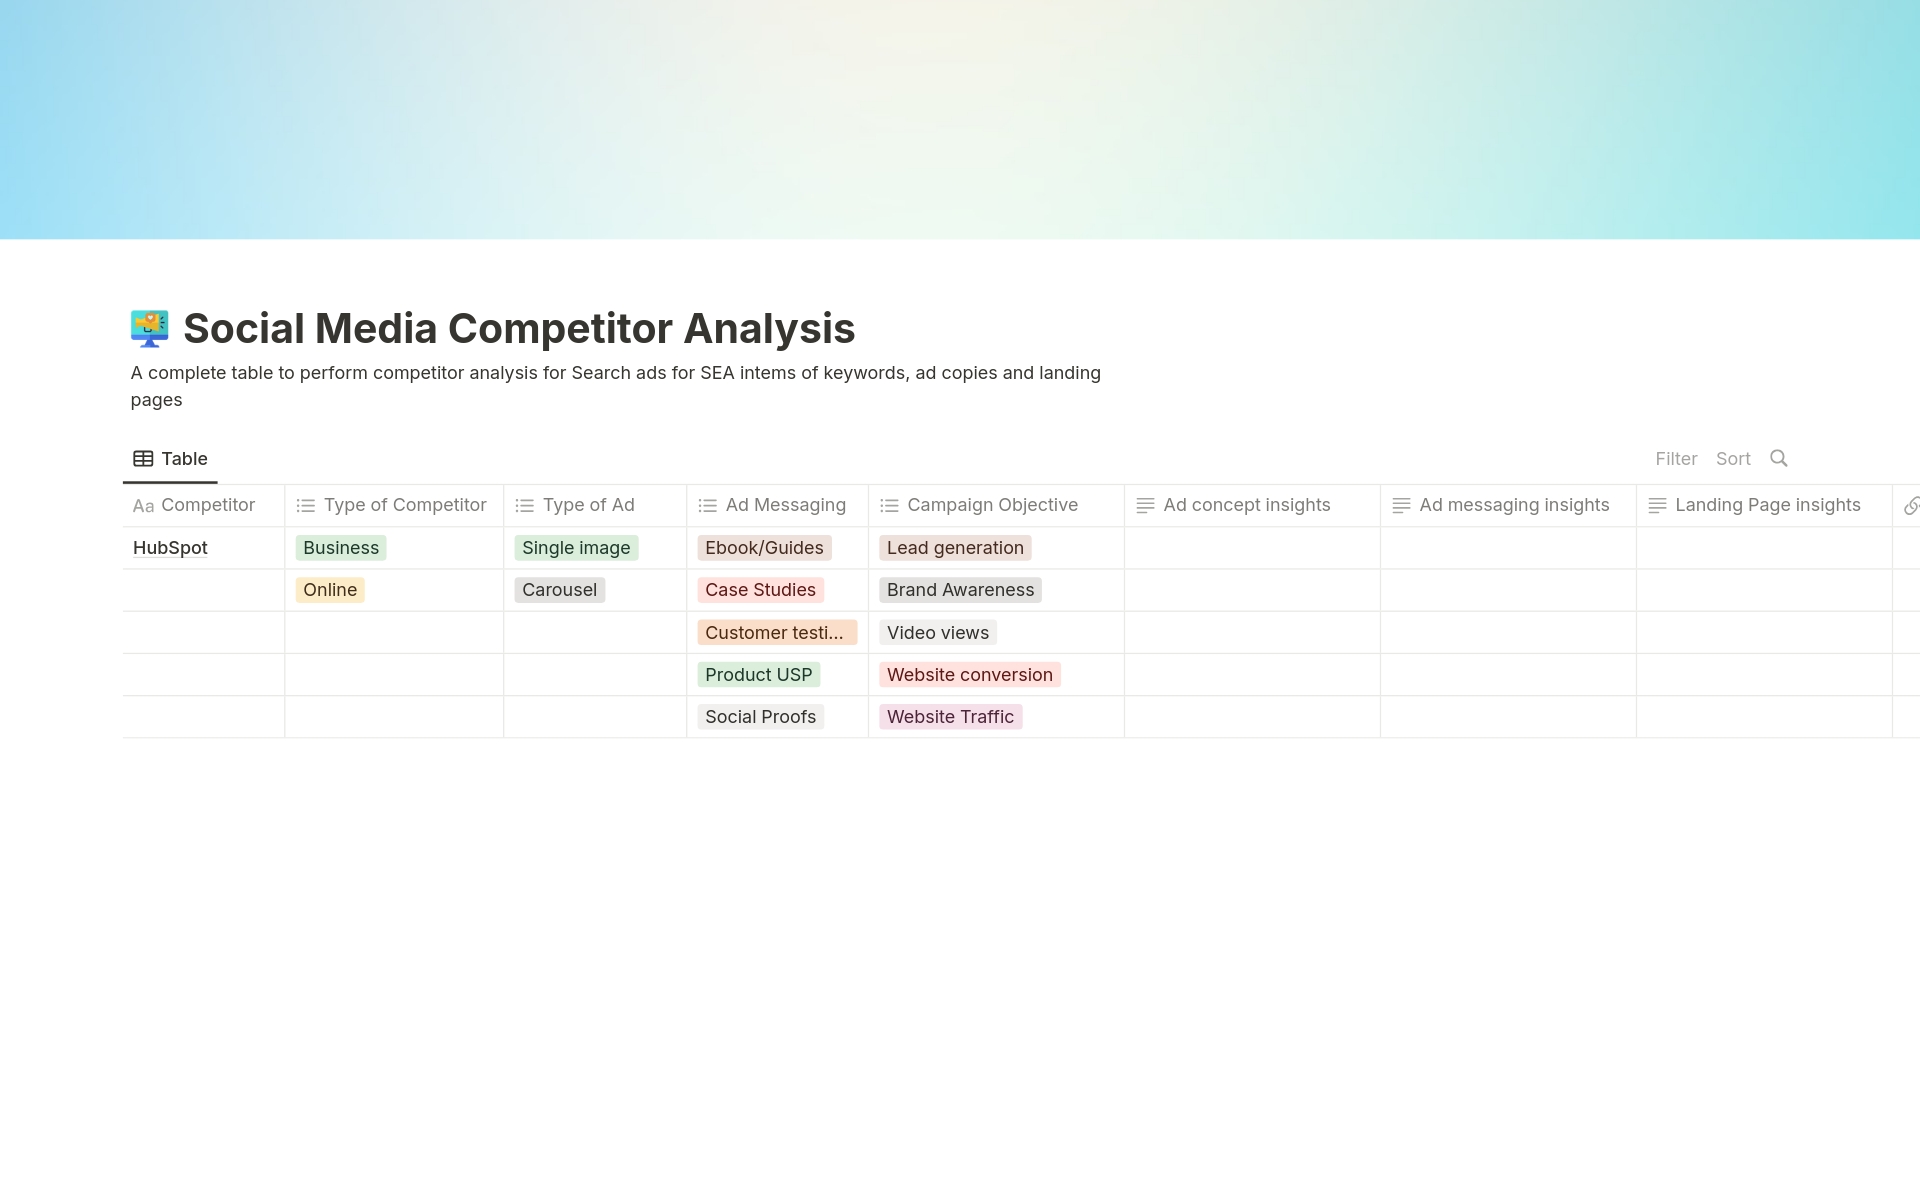 A complete table to perform competitor analysis for Search ads for SEA in-terms  of keywords, ad copies and landing pages